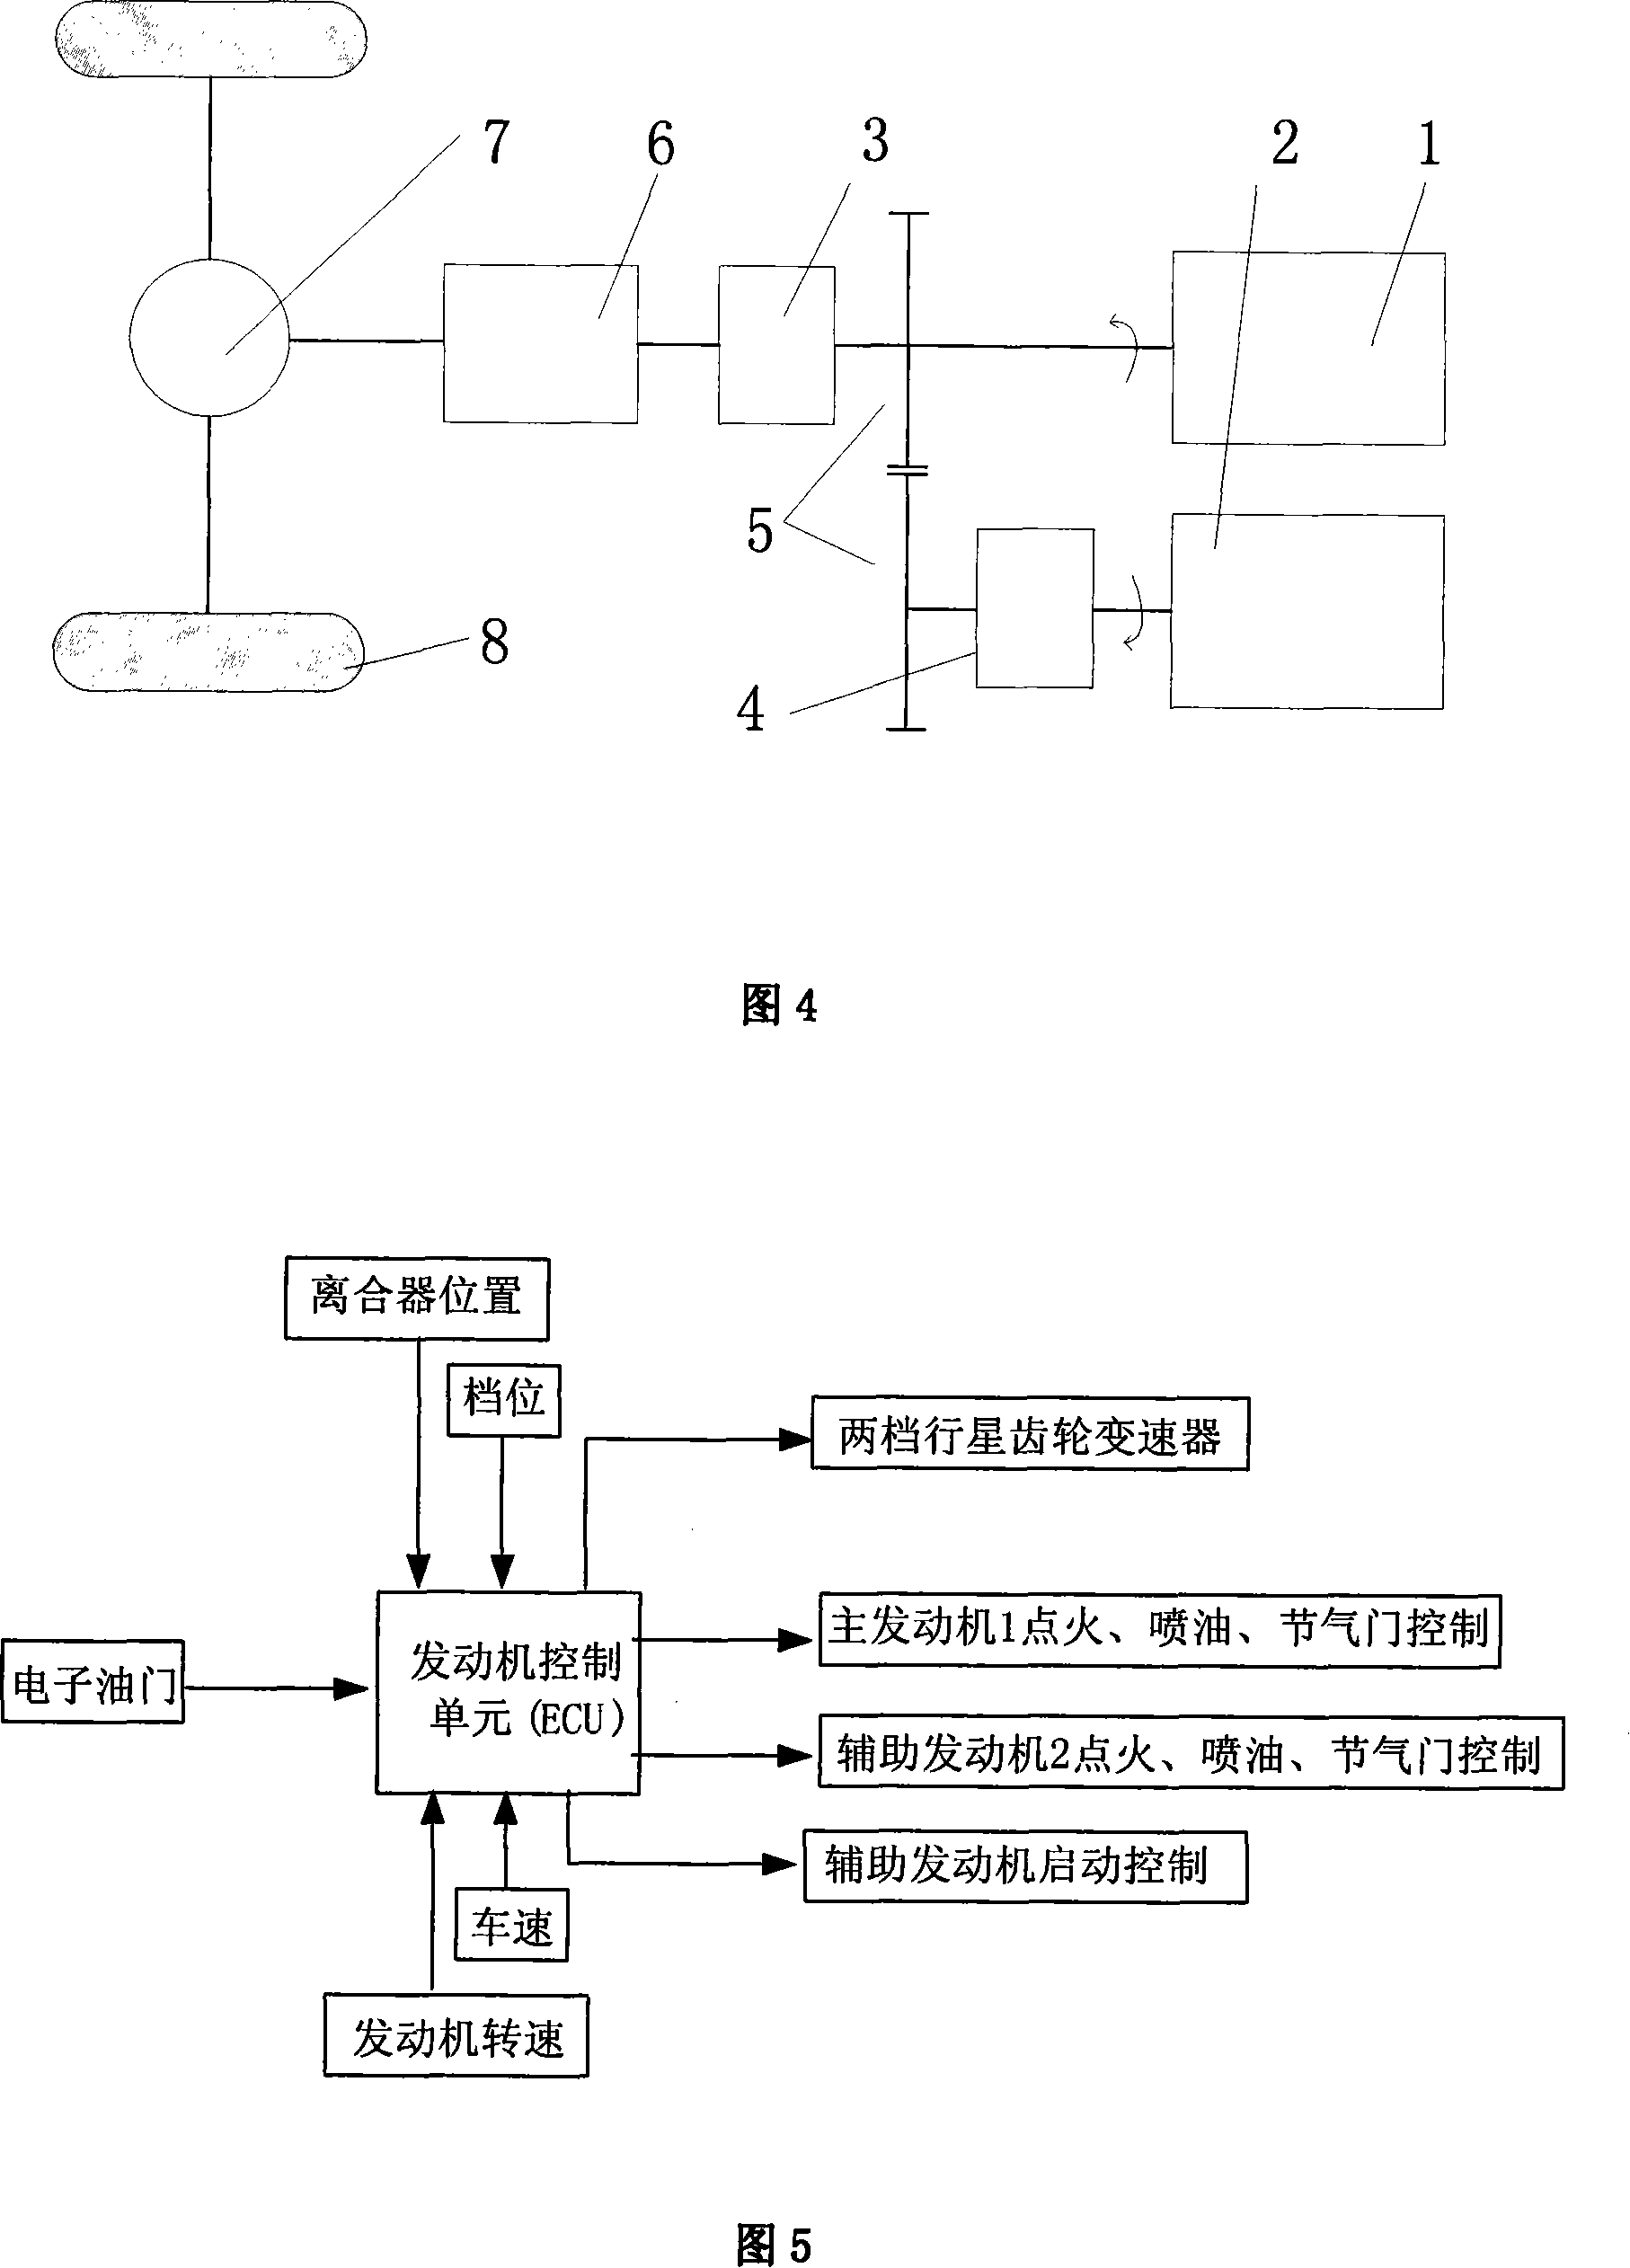 Automobile power system with double-engine and its control method